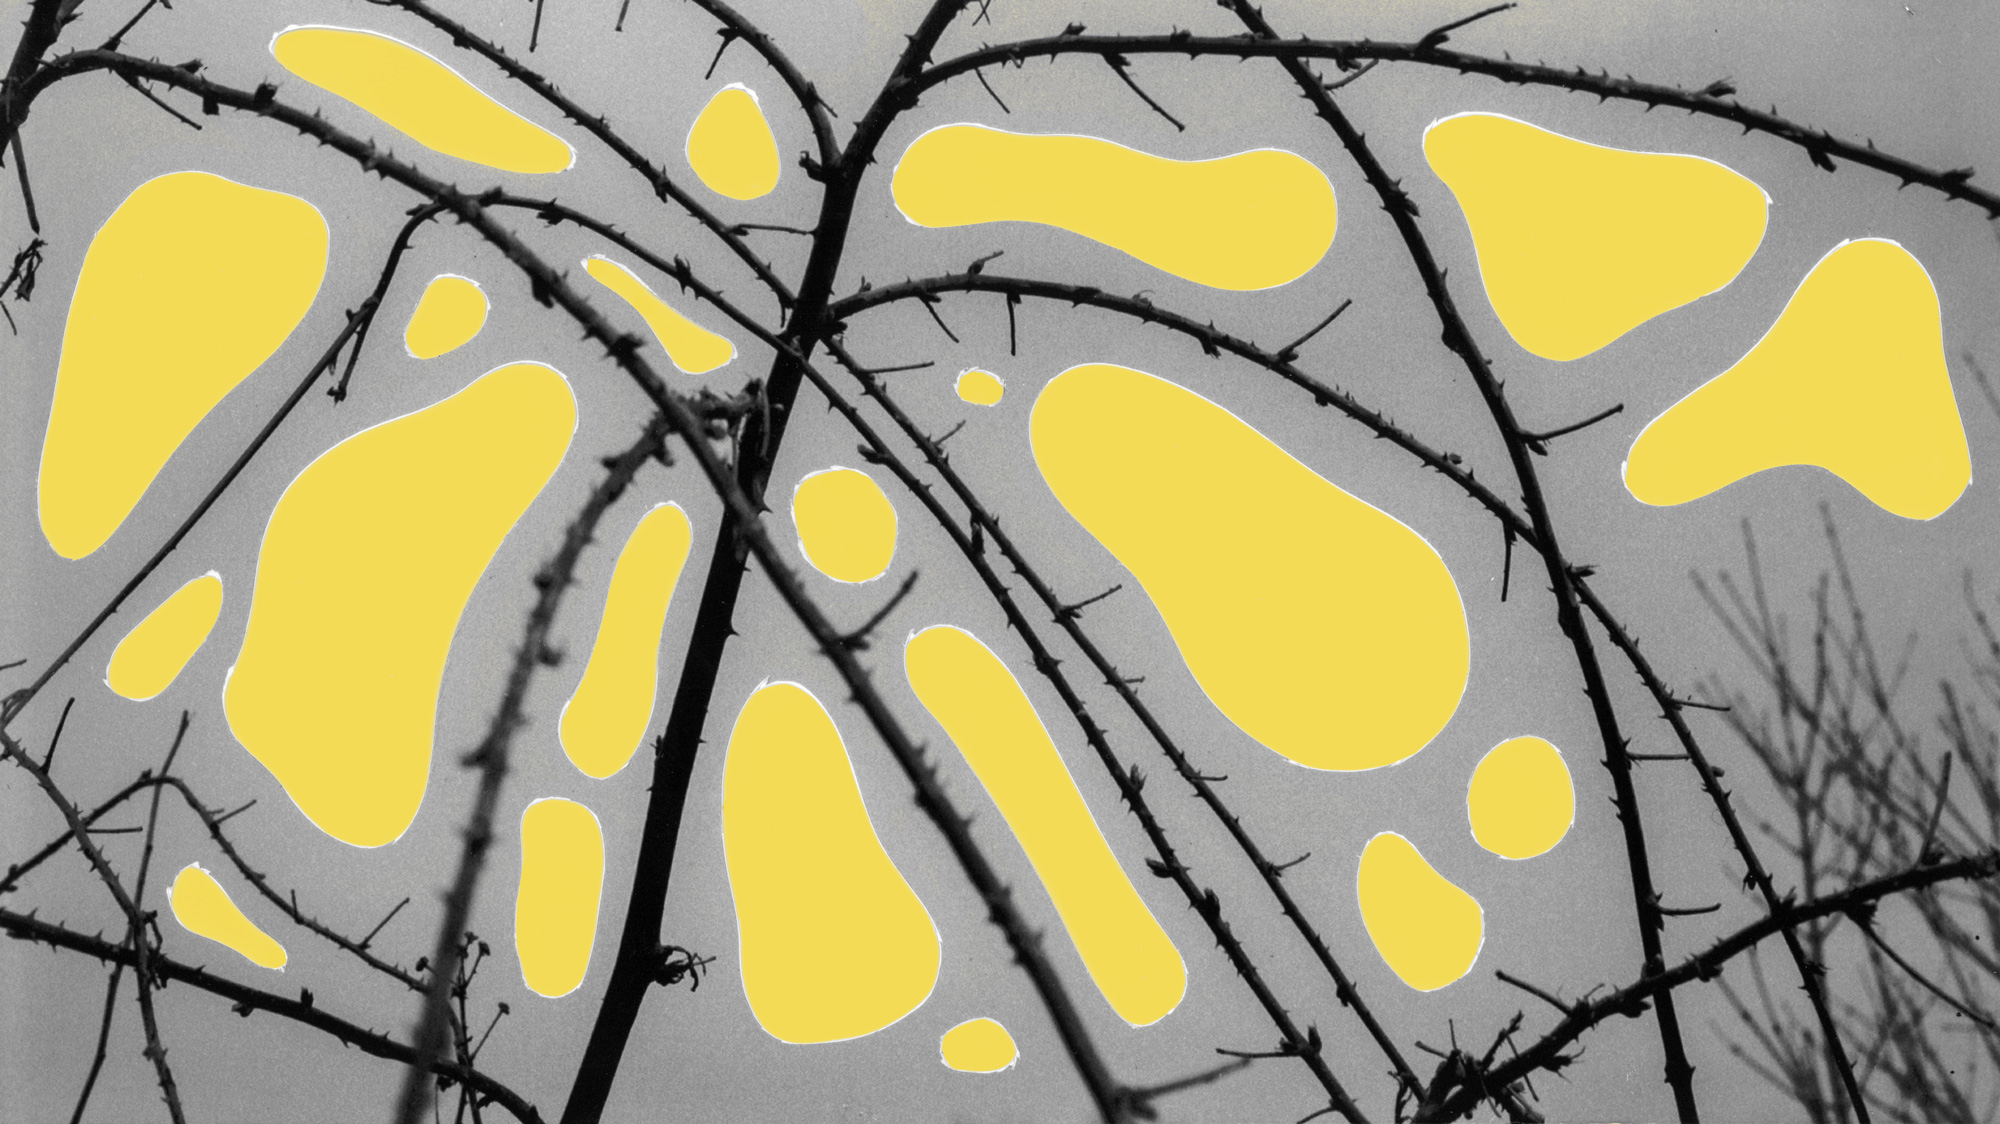 Featured image: A black and white photograph of branches with organic, yellow shapes. Create by Ryan Edmund Thiel.